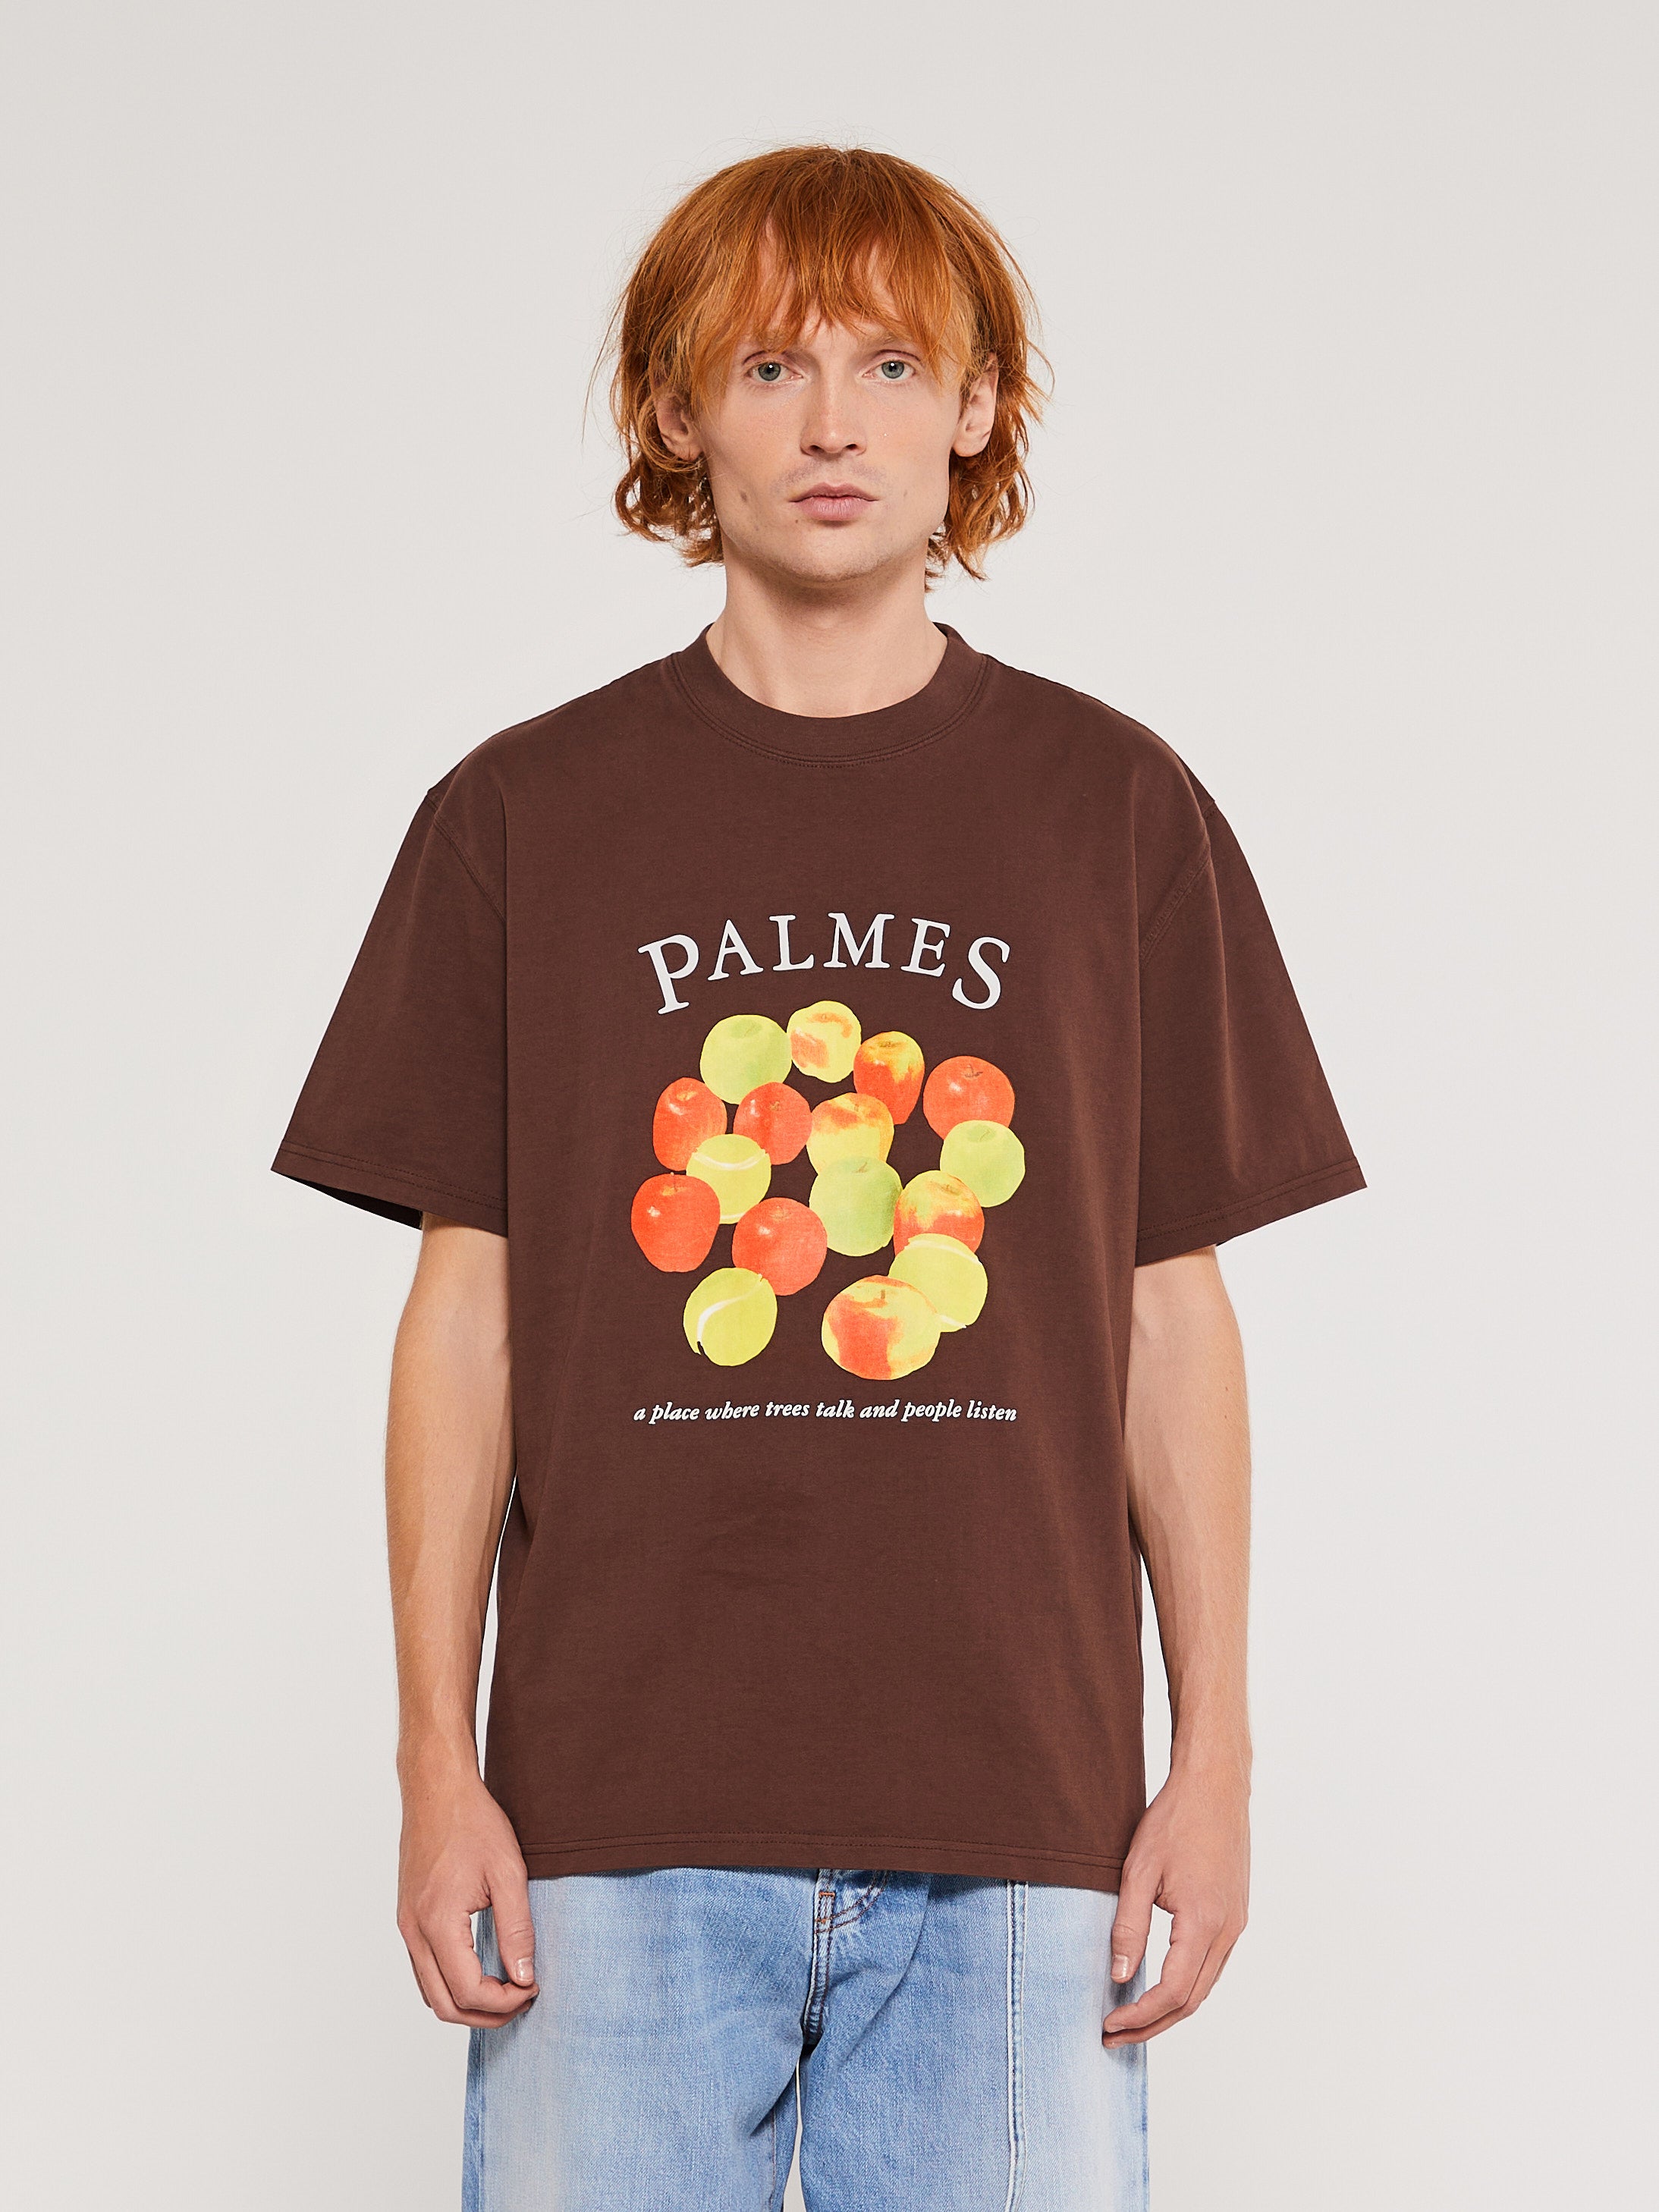 PALMES - Apples T-Shirt in Brown